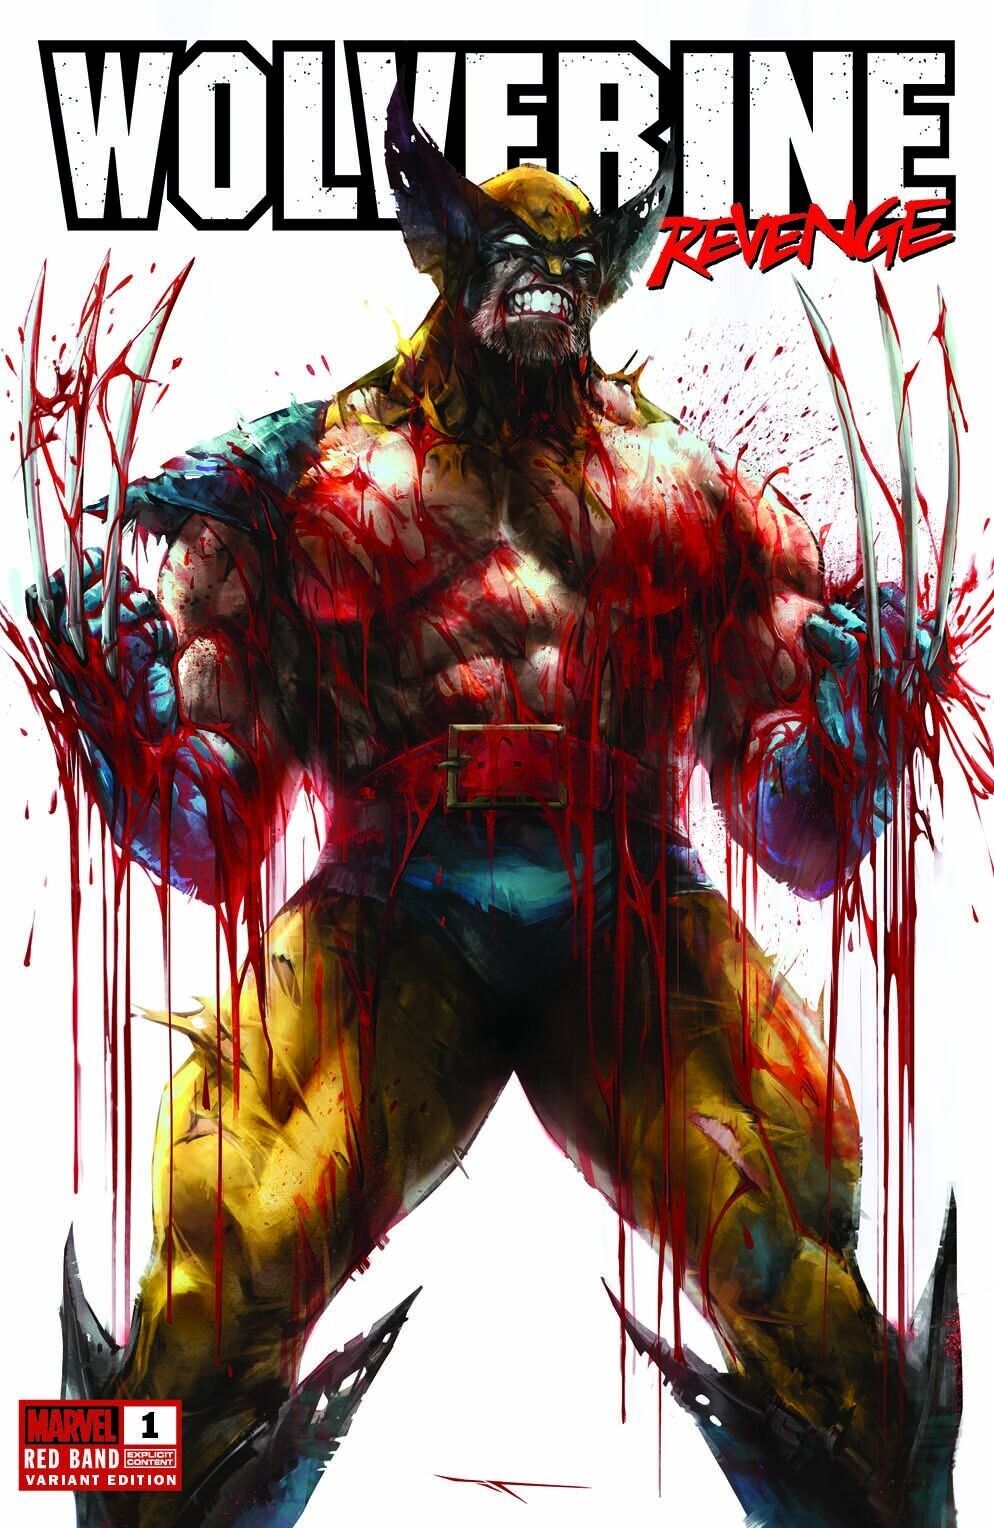 WOLVERINE REVENGE #1 IVAN TAO RED BAND EXCL 